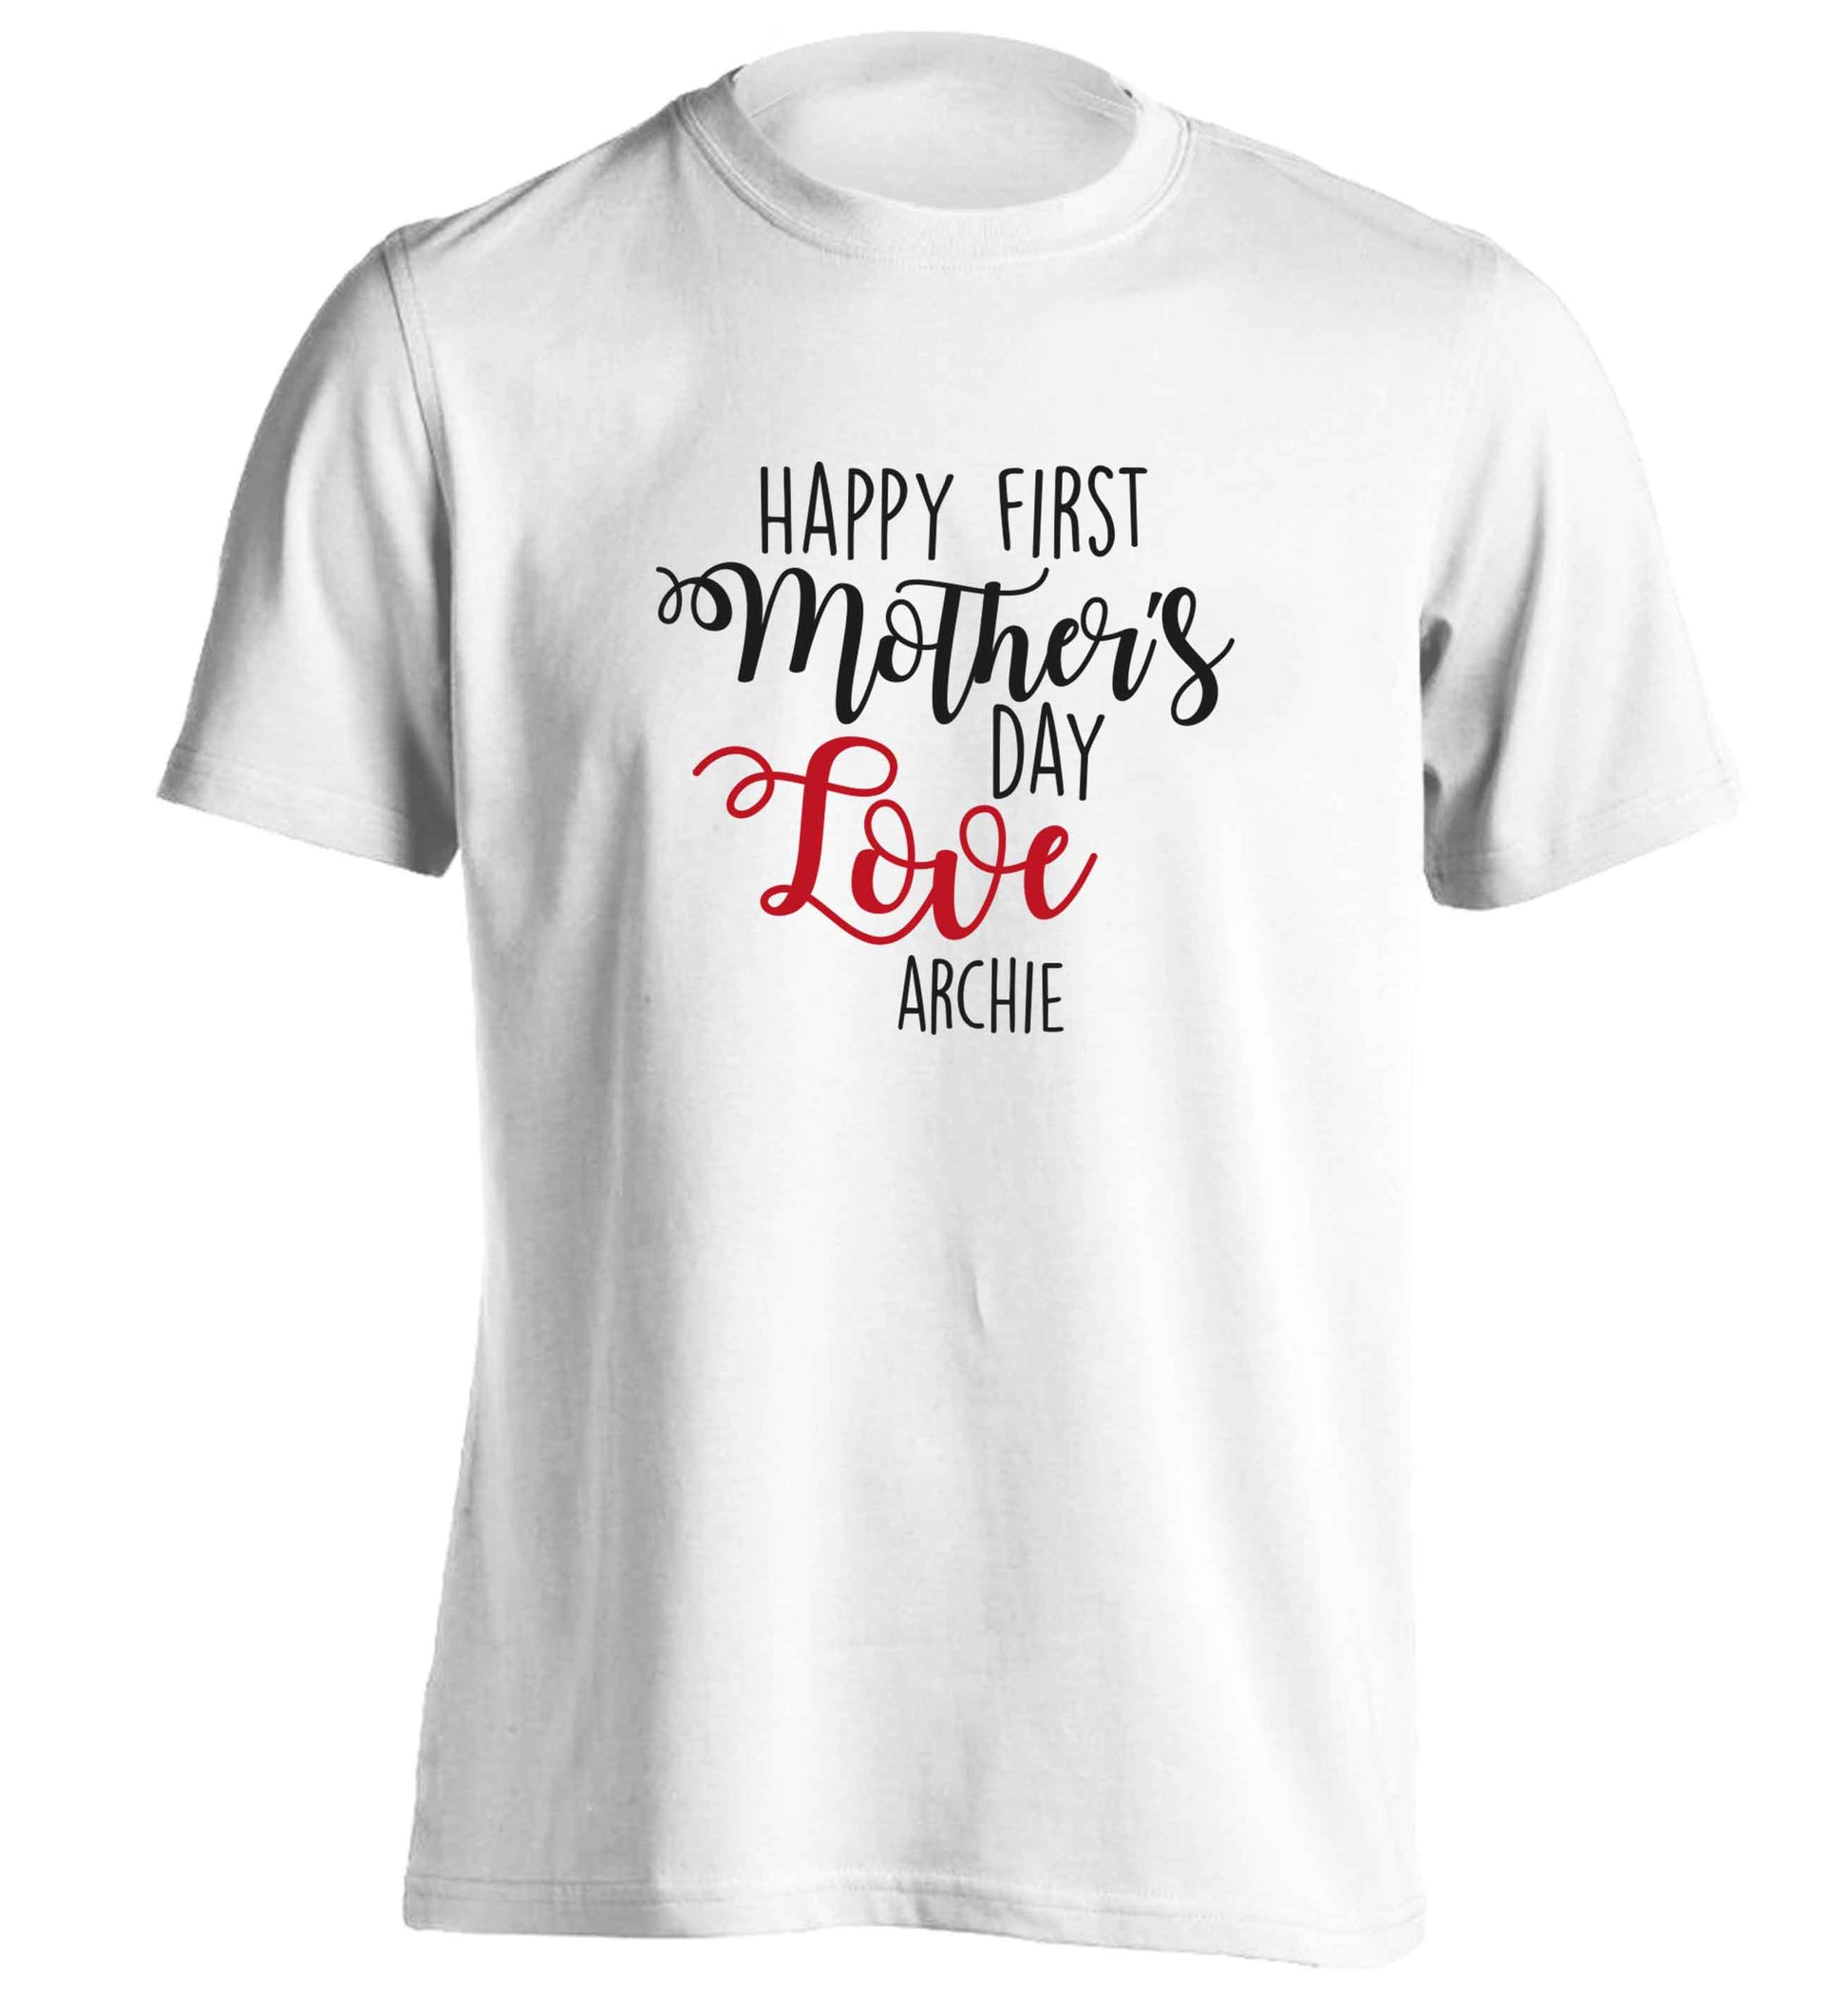 Personalised happy first mother's day love adults unisex white Tshirt 2XL